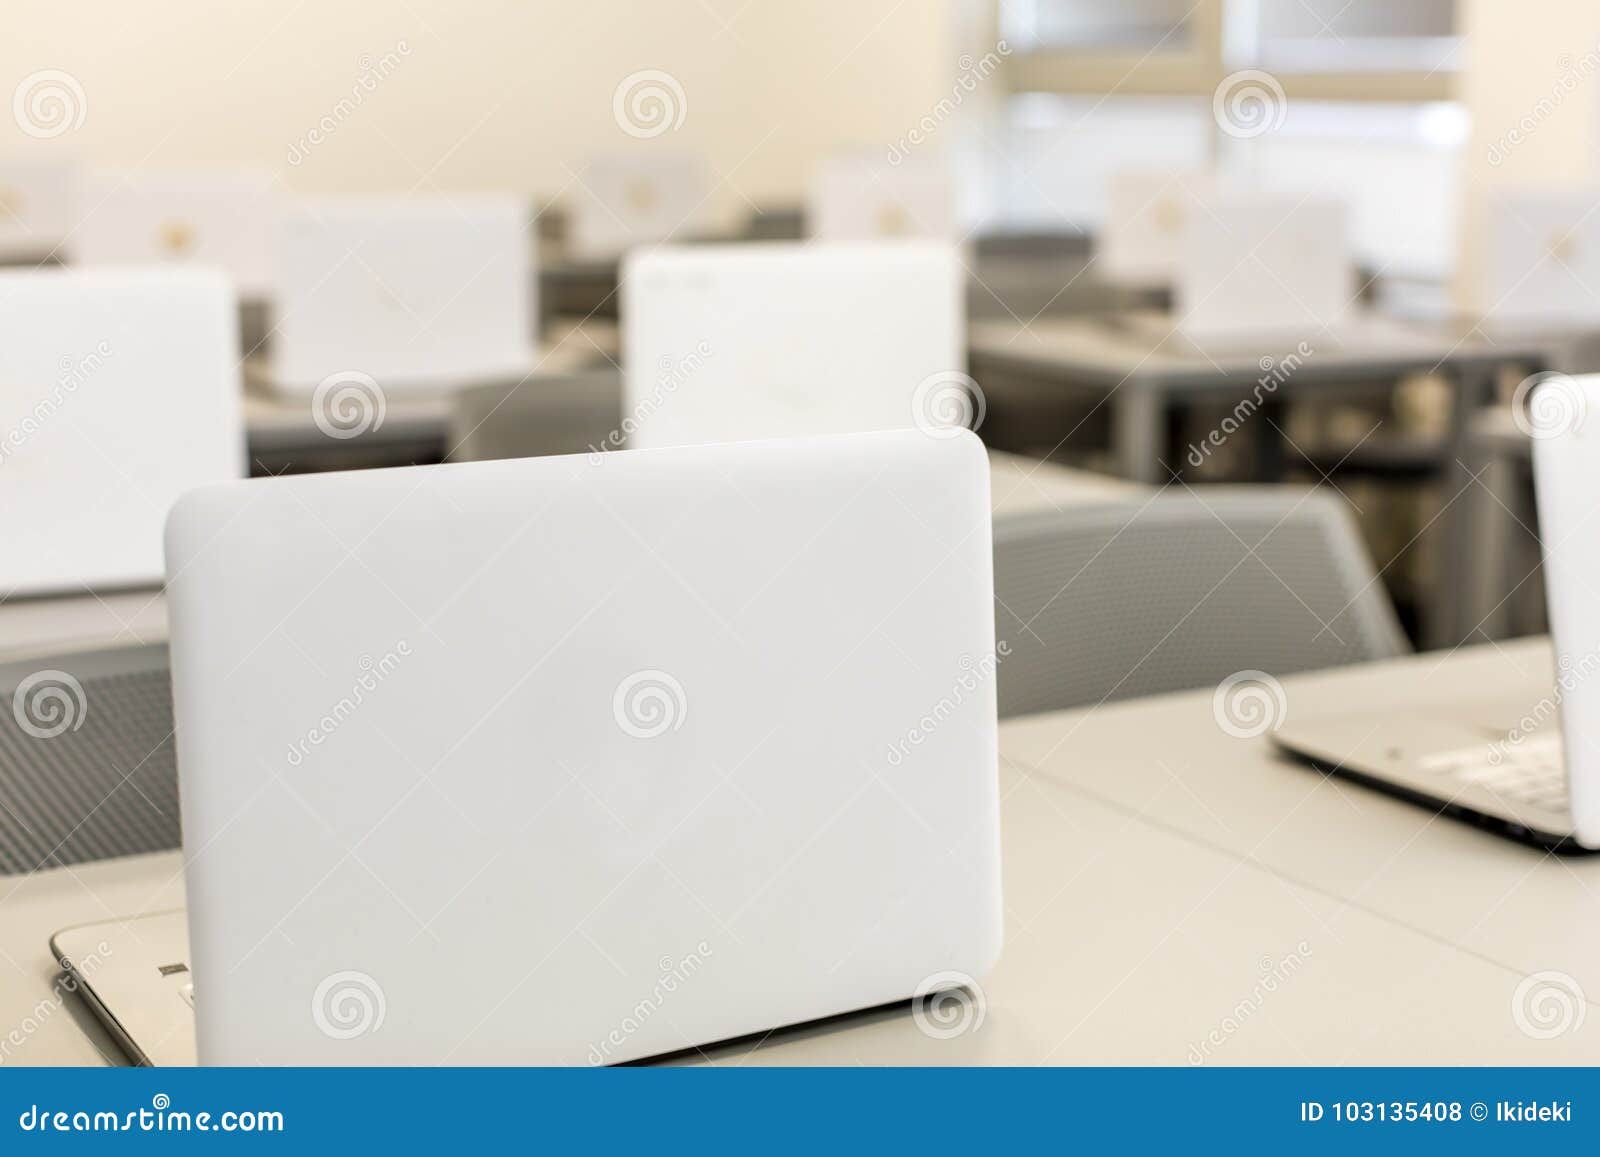 Modern Office Work Desks With Laptops In Depth Photography Stock